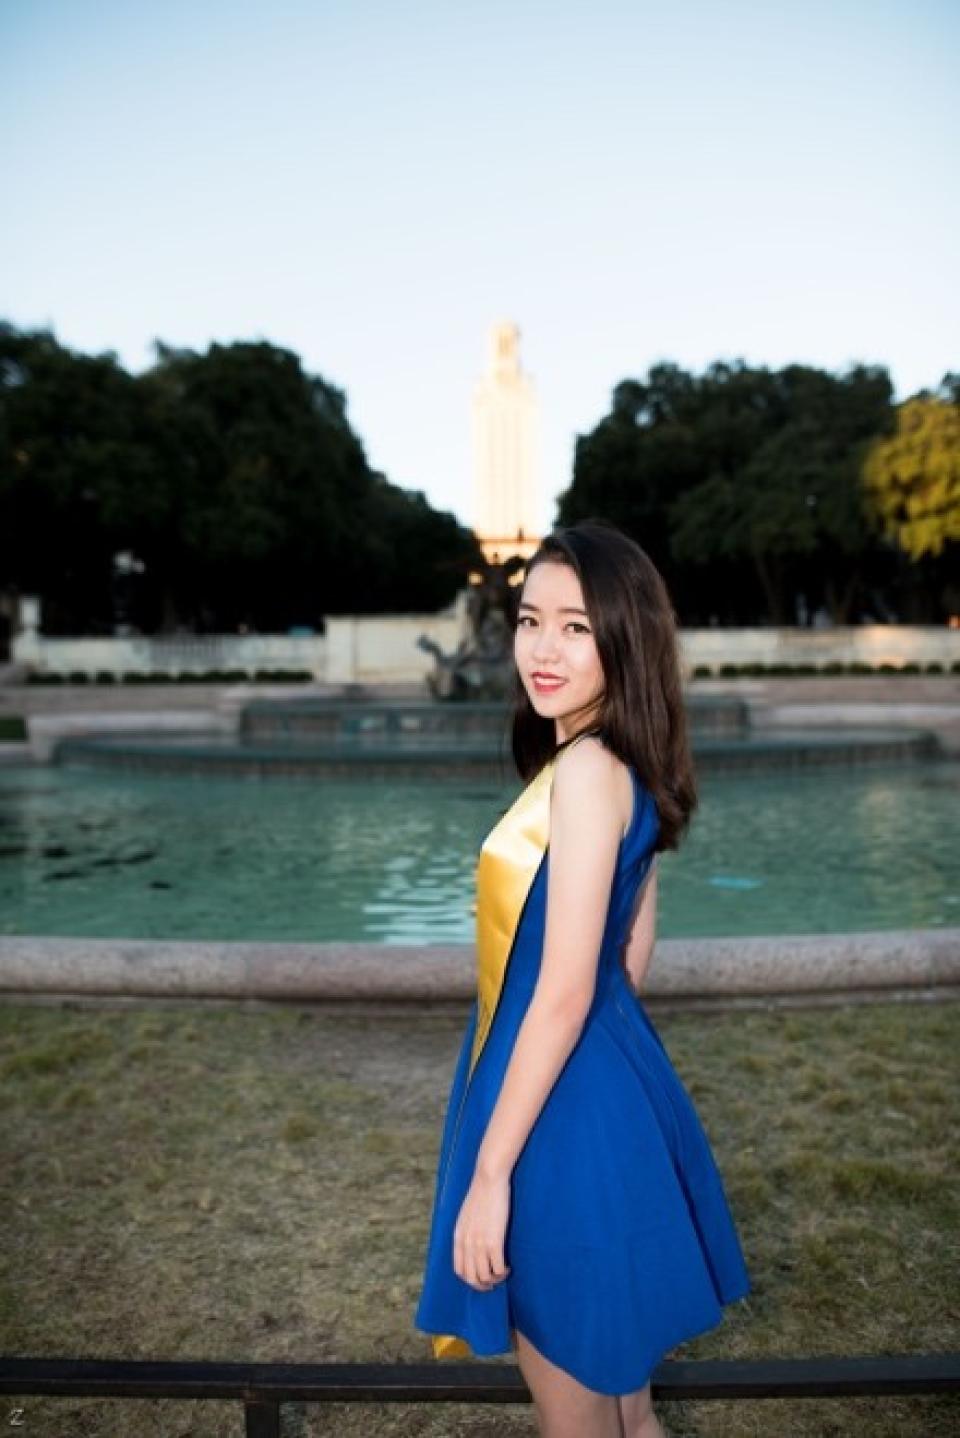 Lizzy Yi MSBA 21 at her University of Texas, Austin graduation in 2016